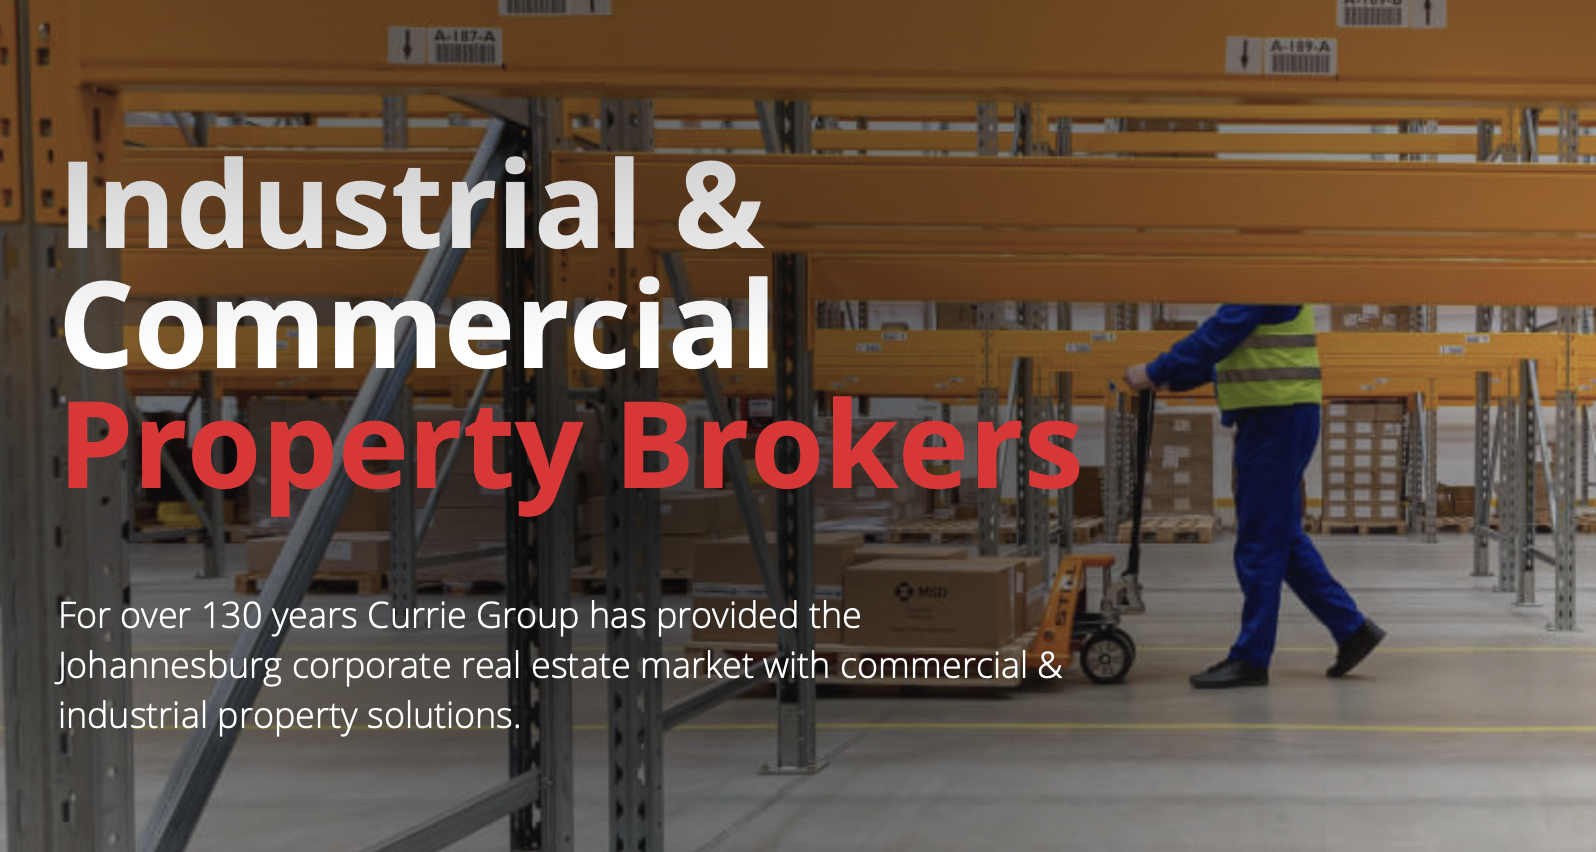 Currie Group - Property Brokers